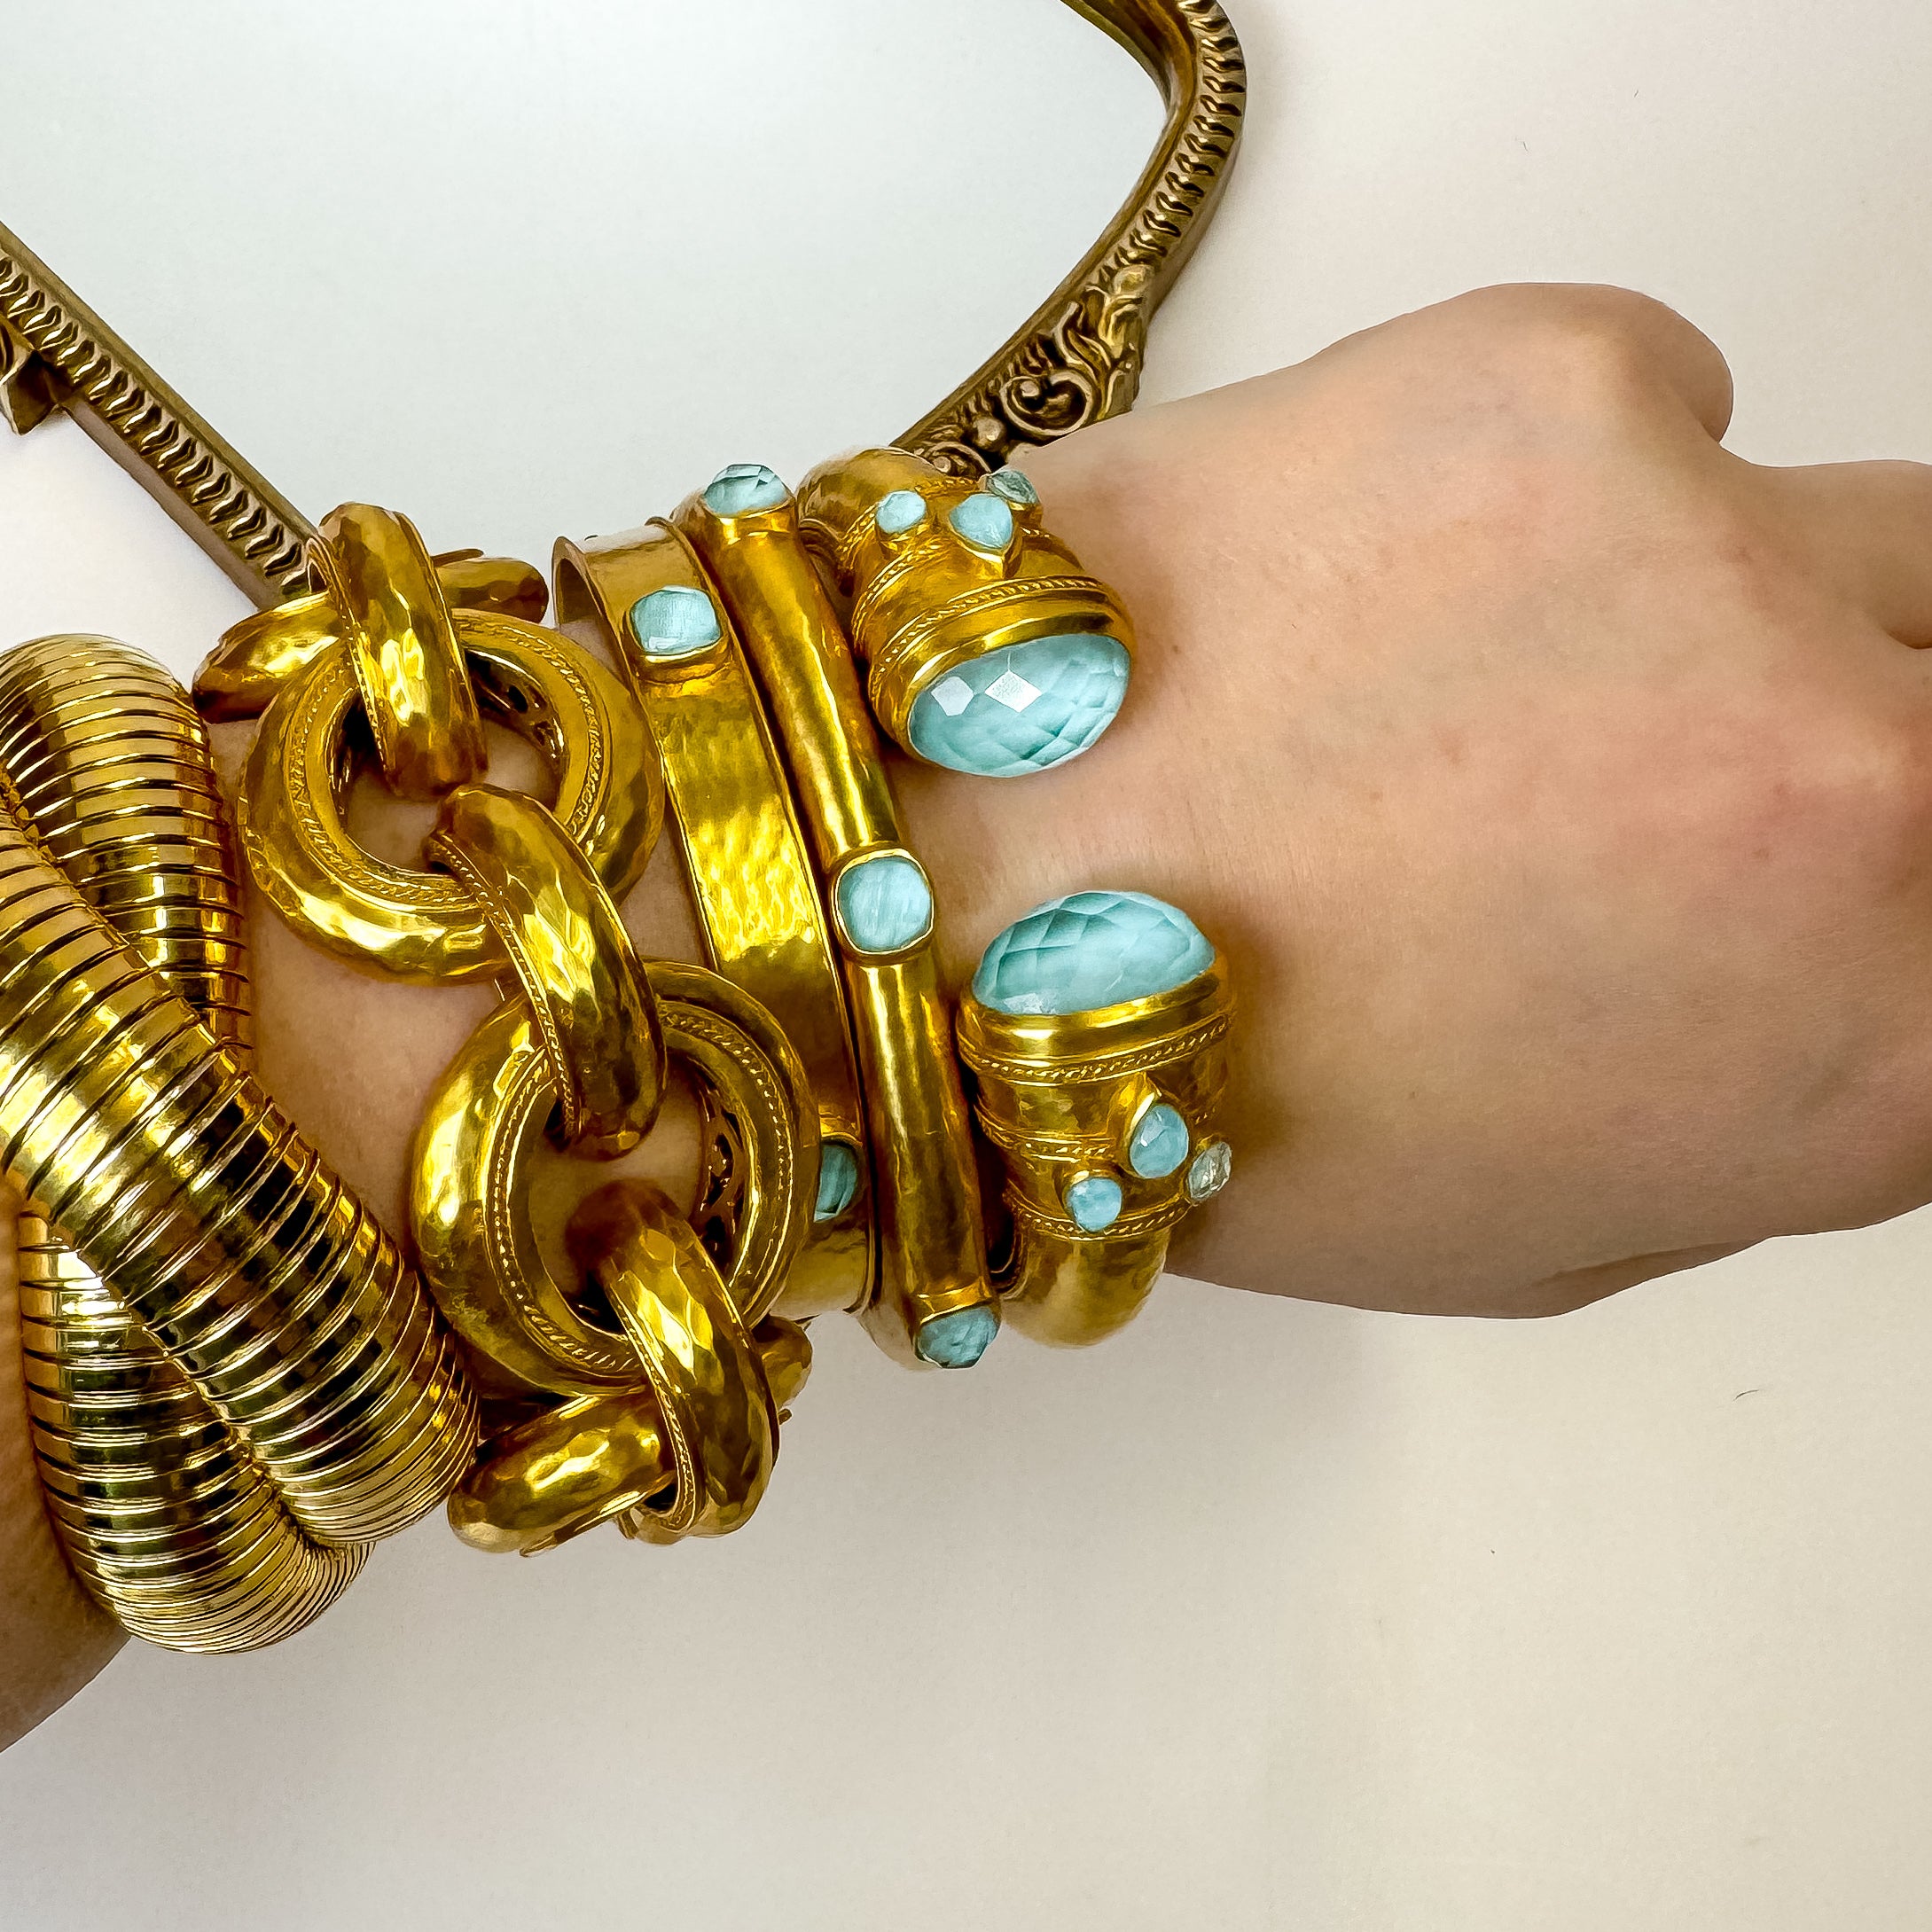 Julie Vos | Catalina Hinge Bangle with Iridescent Capri Blue Crystals in Gold - Giddy Up Glamour Boutique